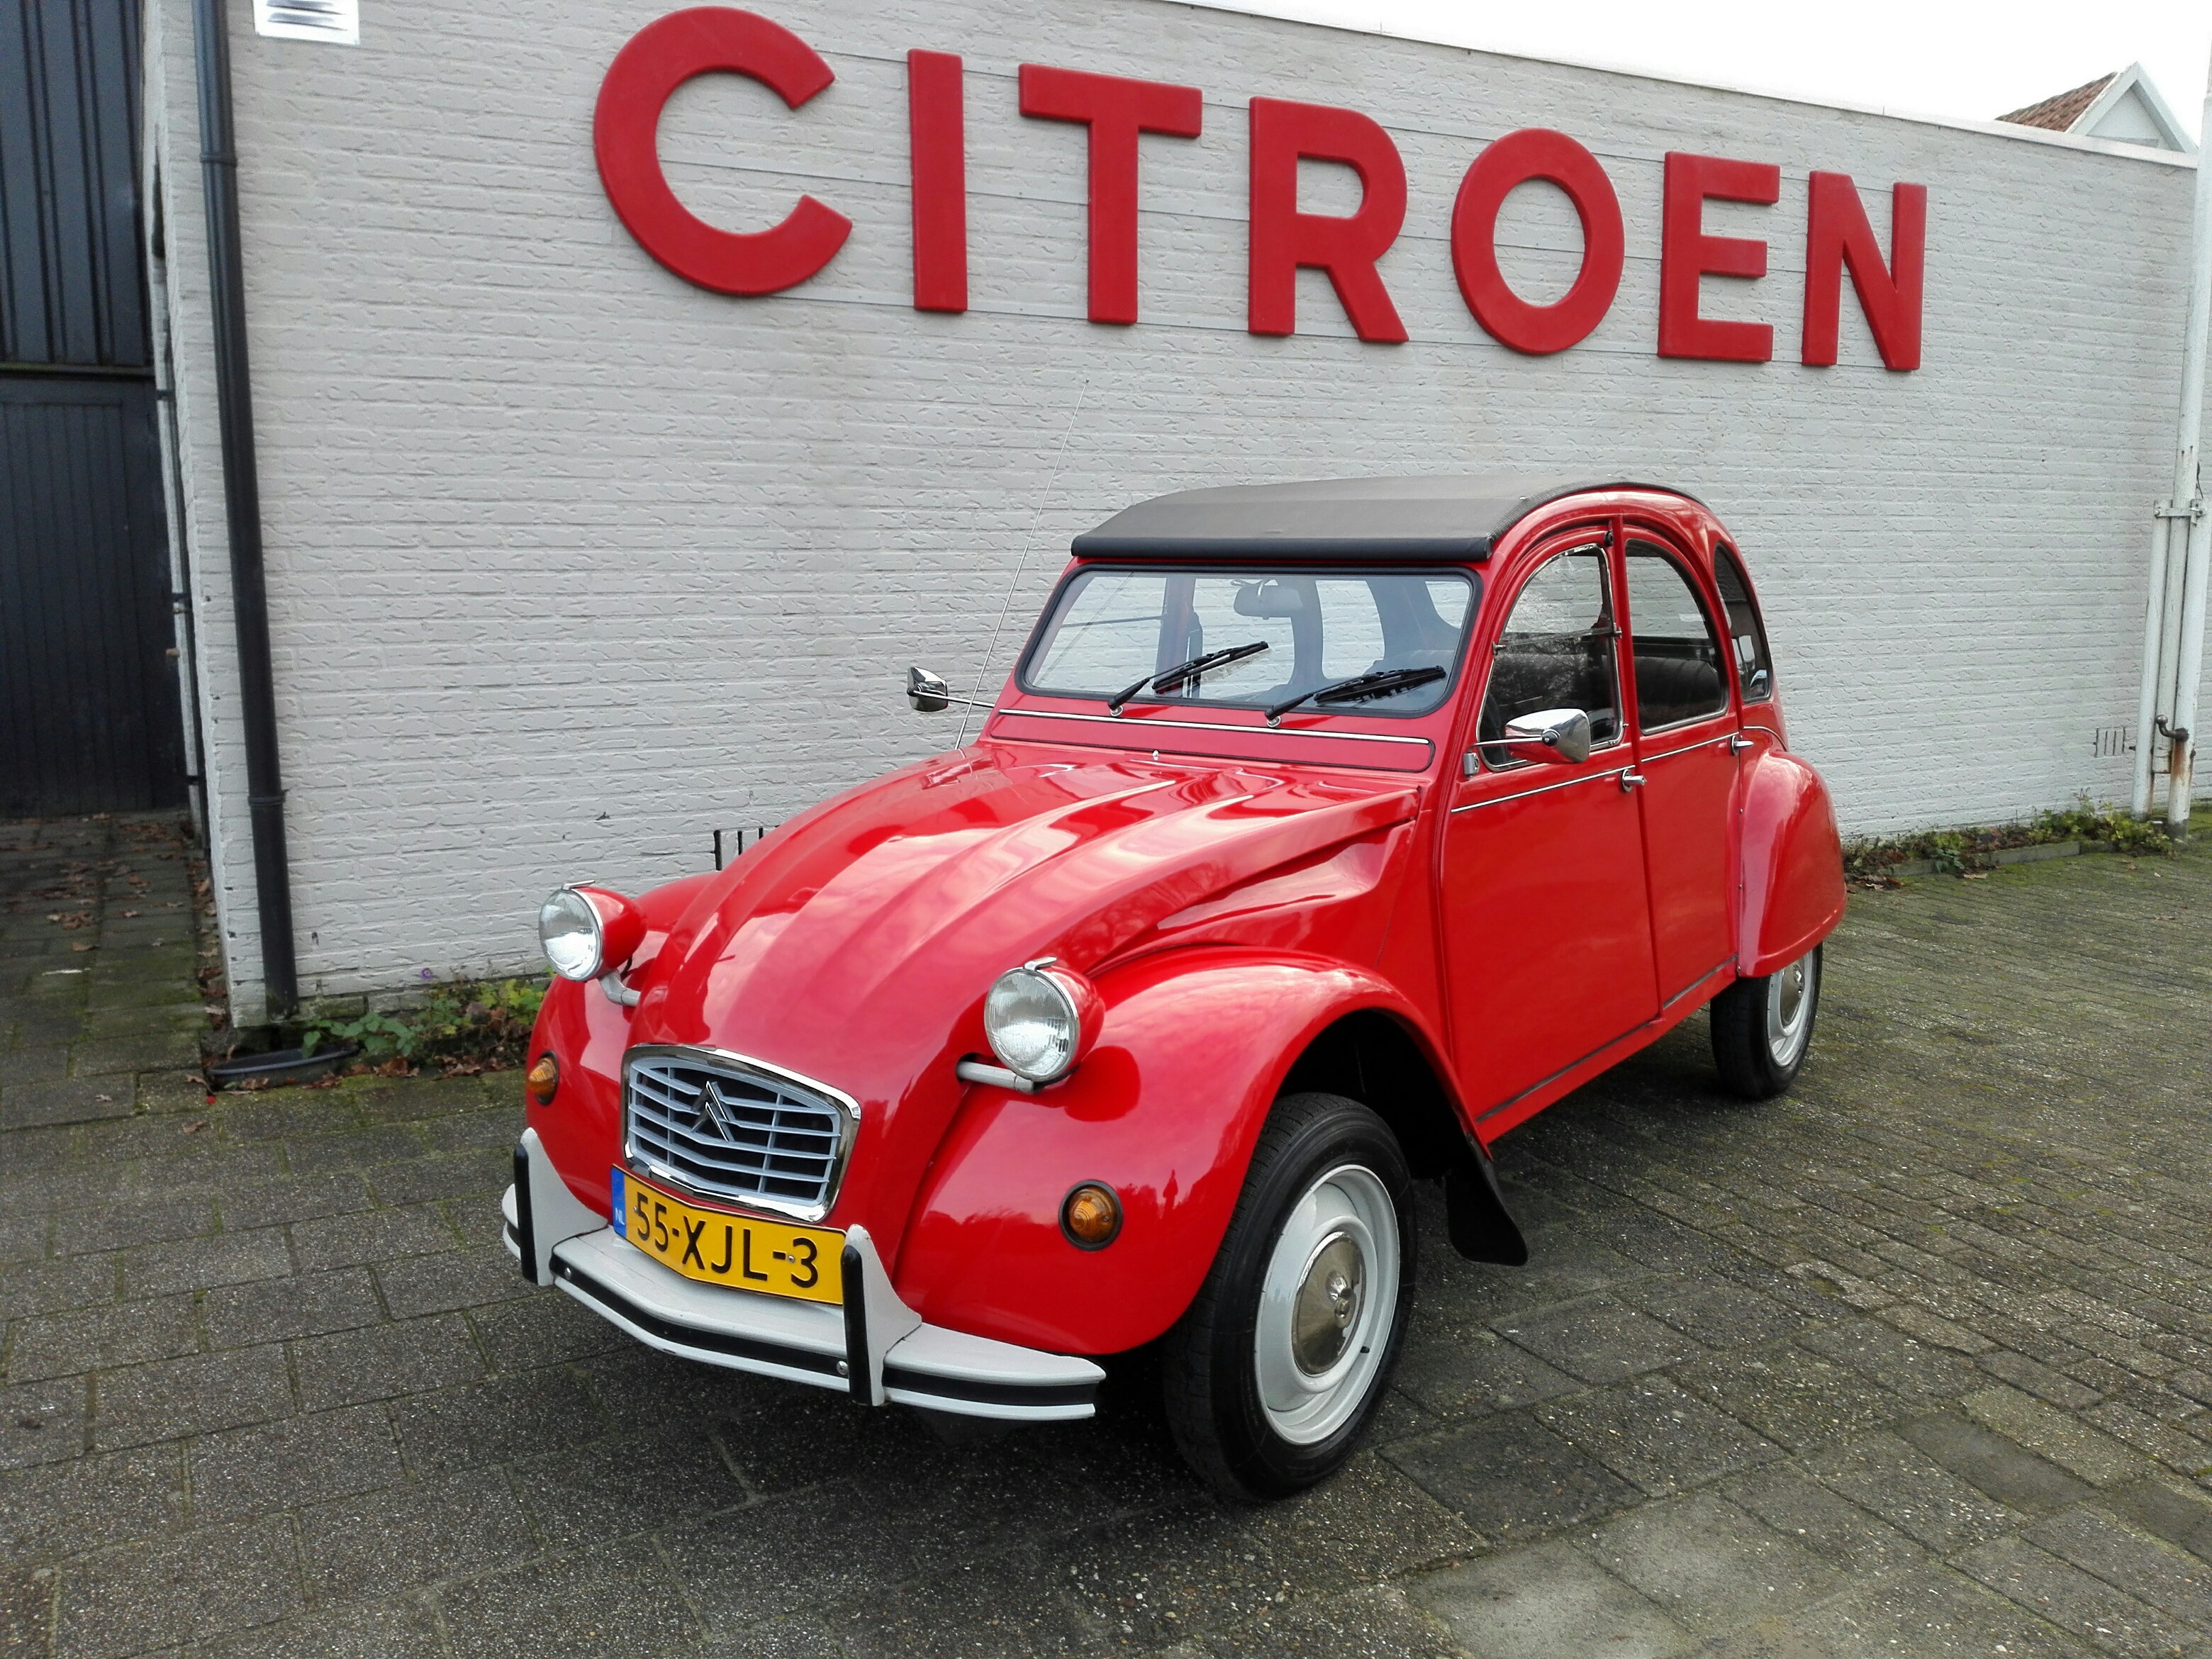 rood 55 xjl 3